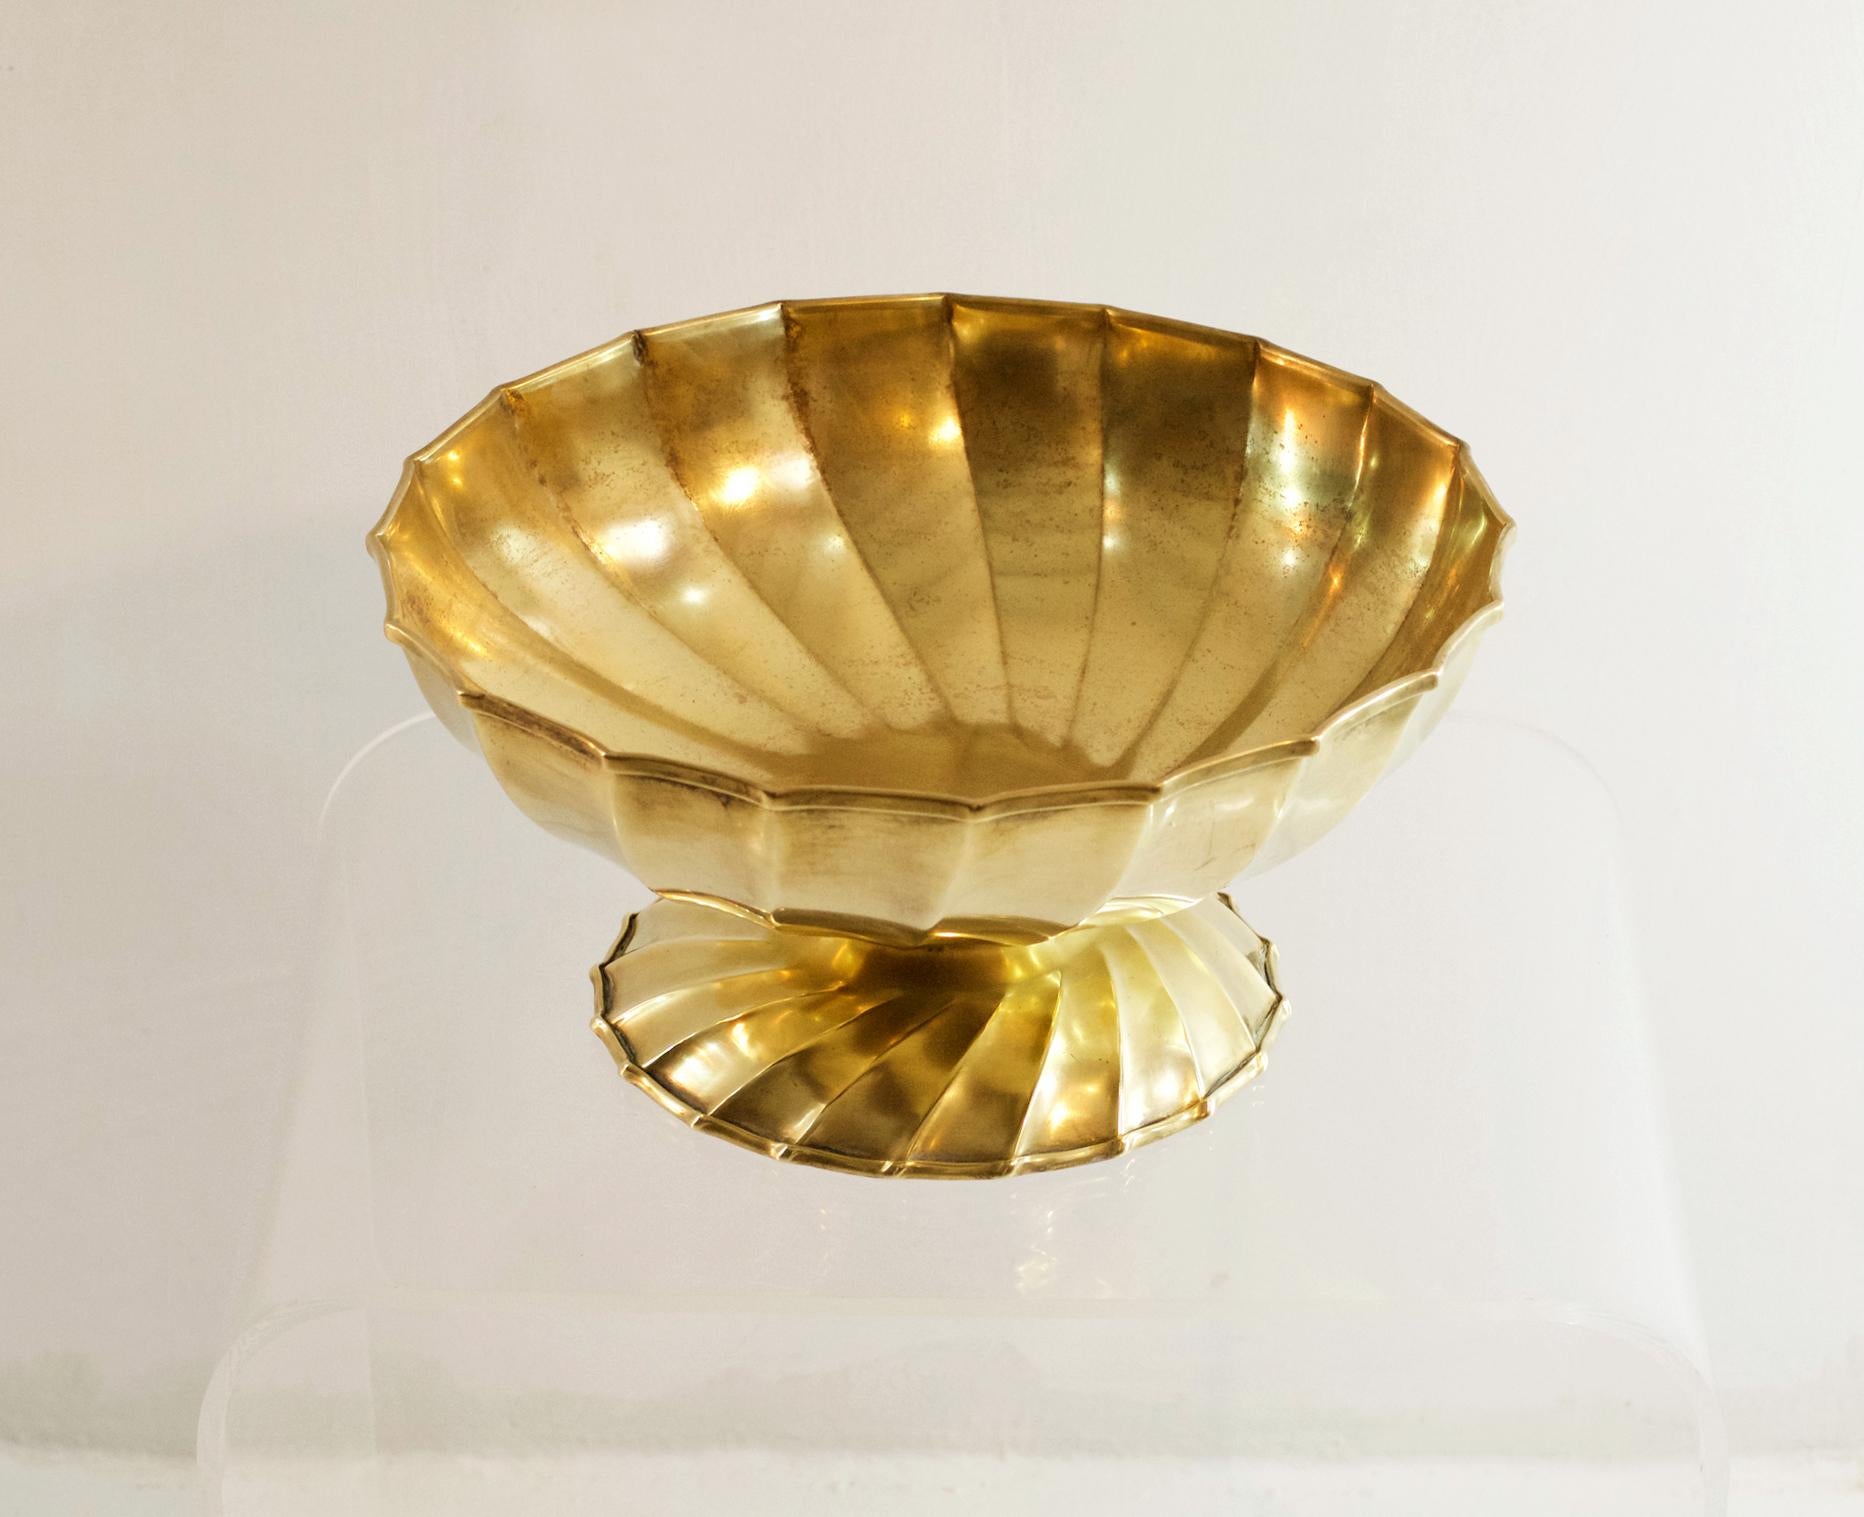 Beautiful handmade bowl in brass from the 1950s. Perfect for fruit, popcorn, bread or sweets.